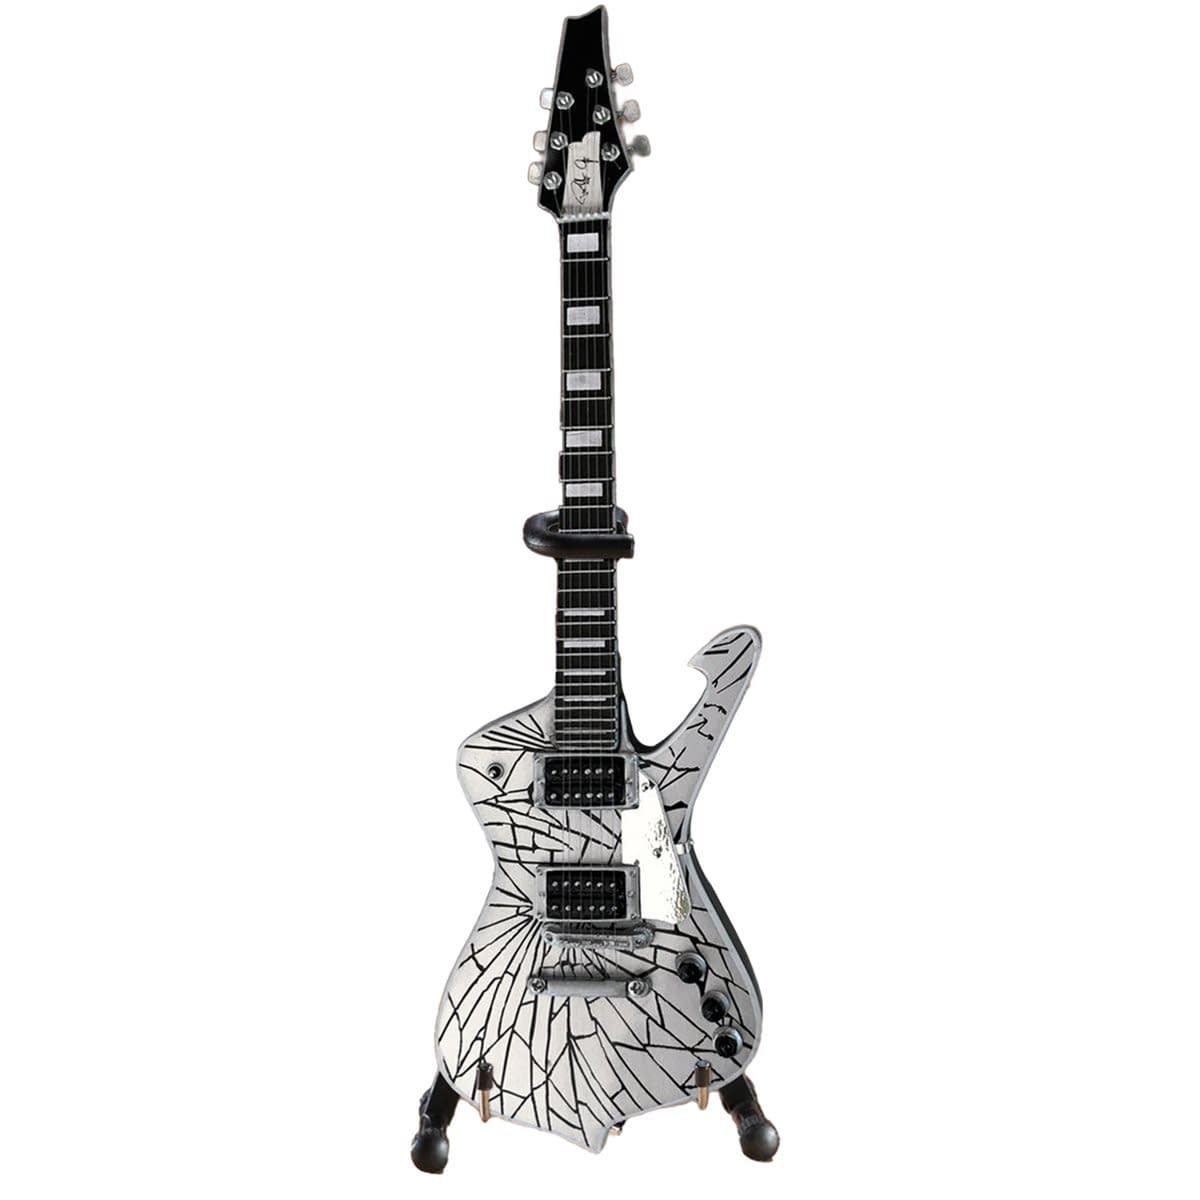 Classic Rock Becomes Collectible with Mini Guitars From Axe Haven